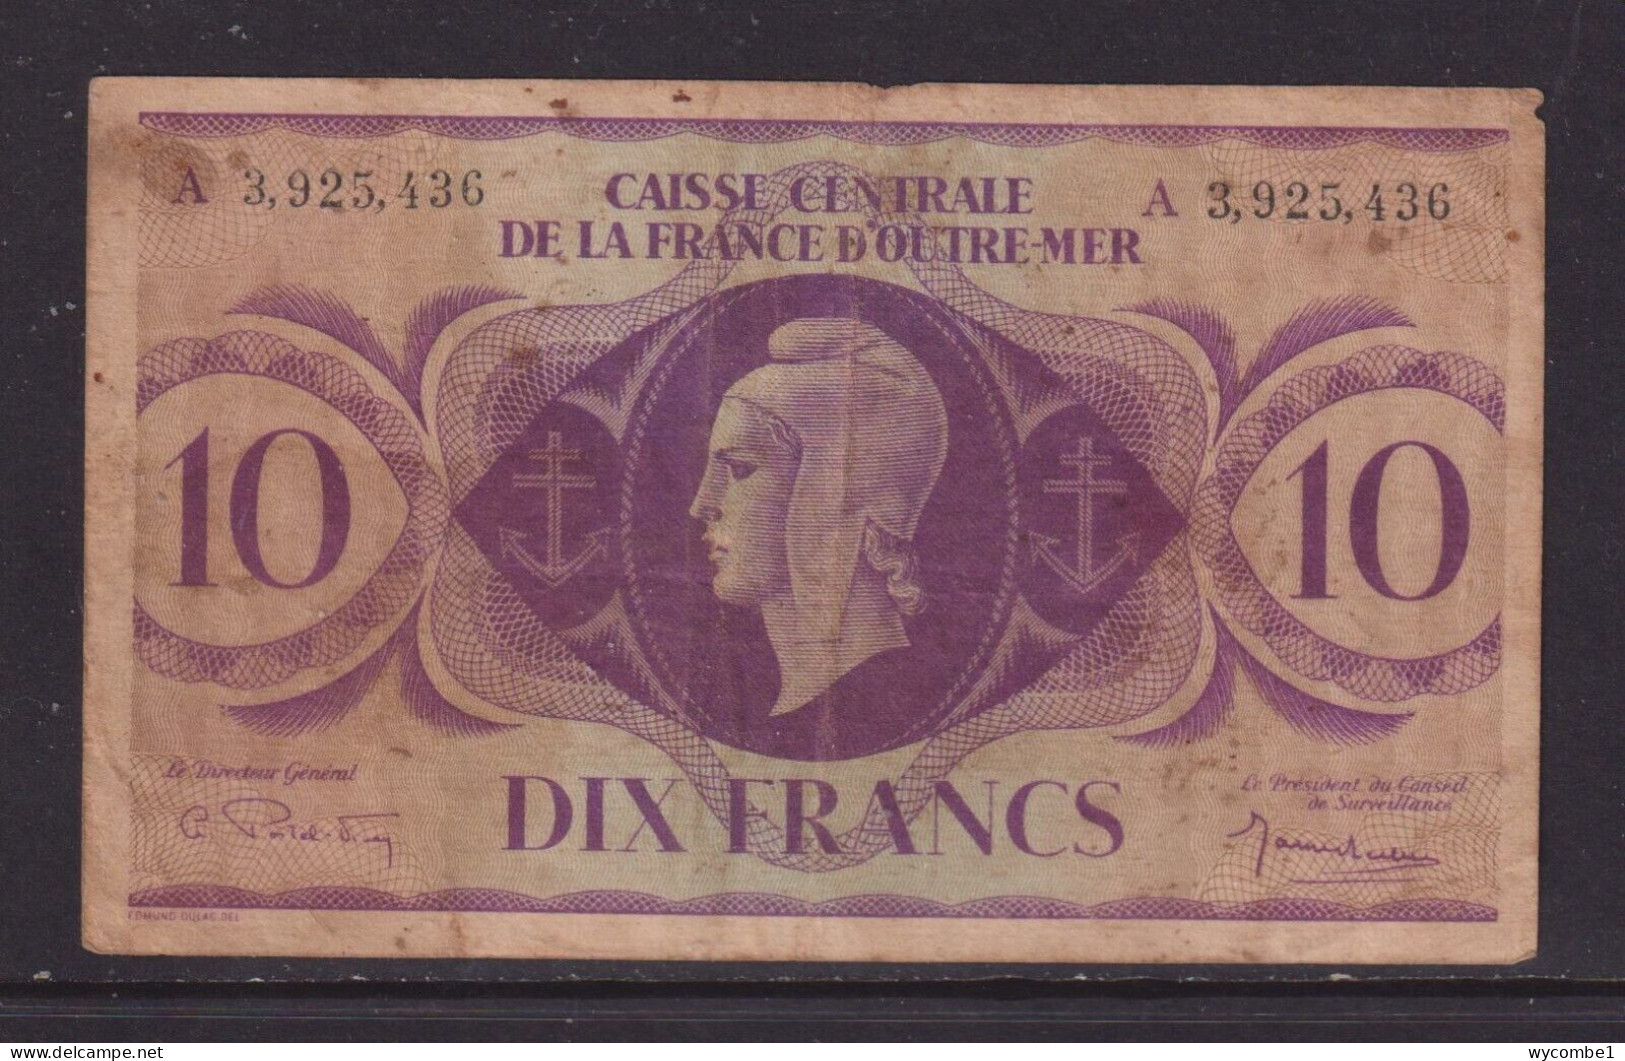 FRENCH EQUATORIAL AFRICA - 1944 10 Francs Circulated Note - Republic Of Congo (Congo-Brazzaville)